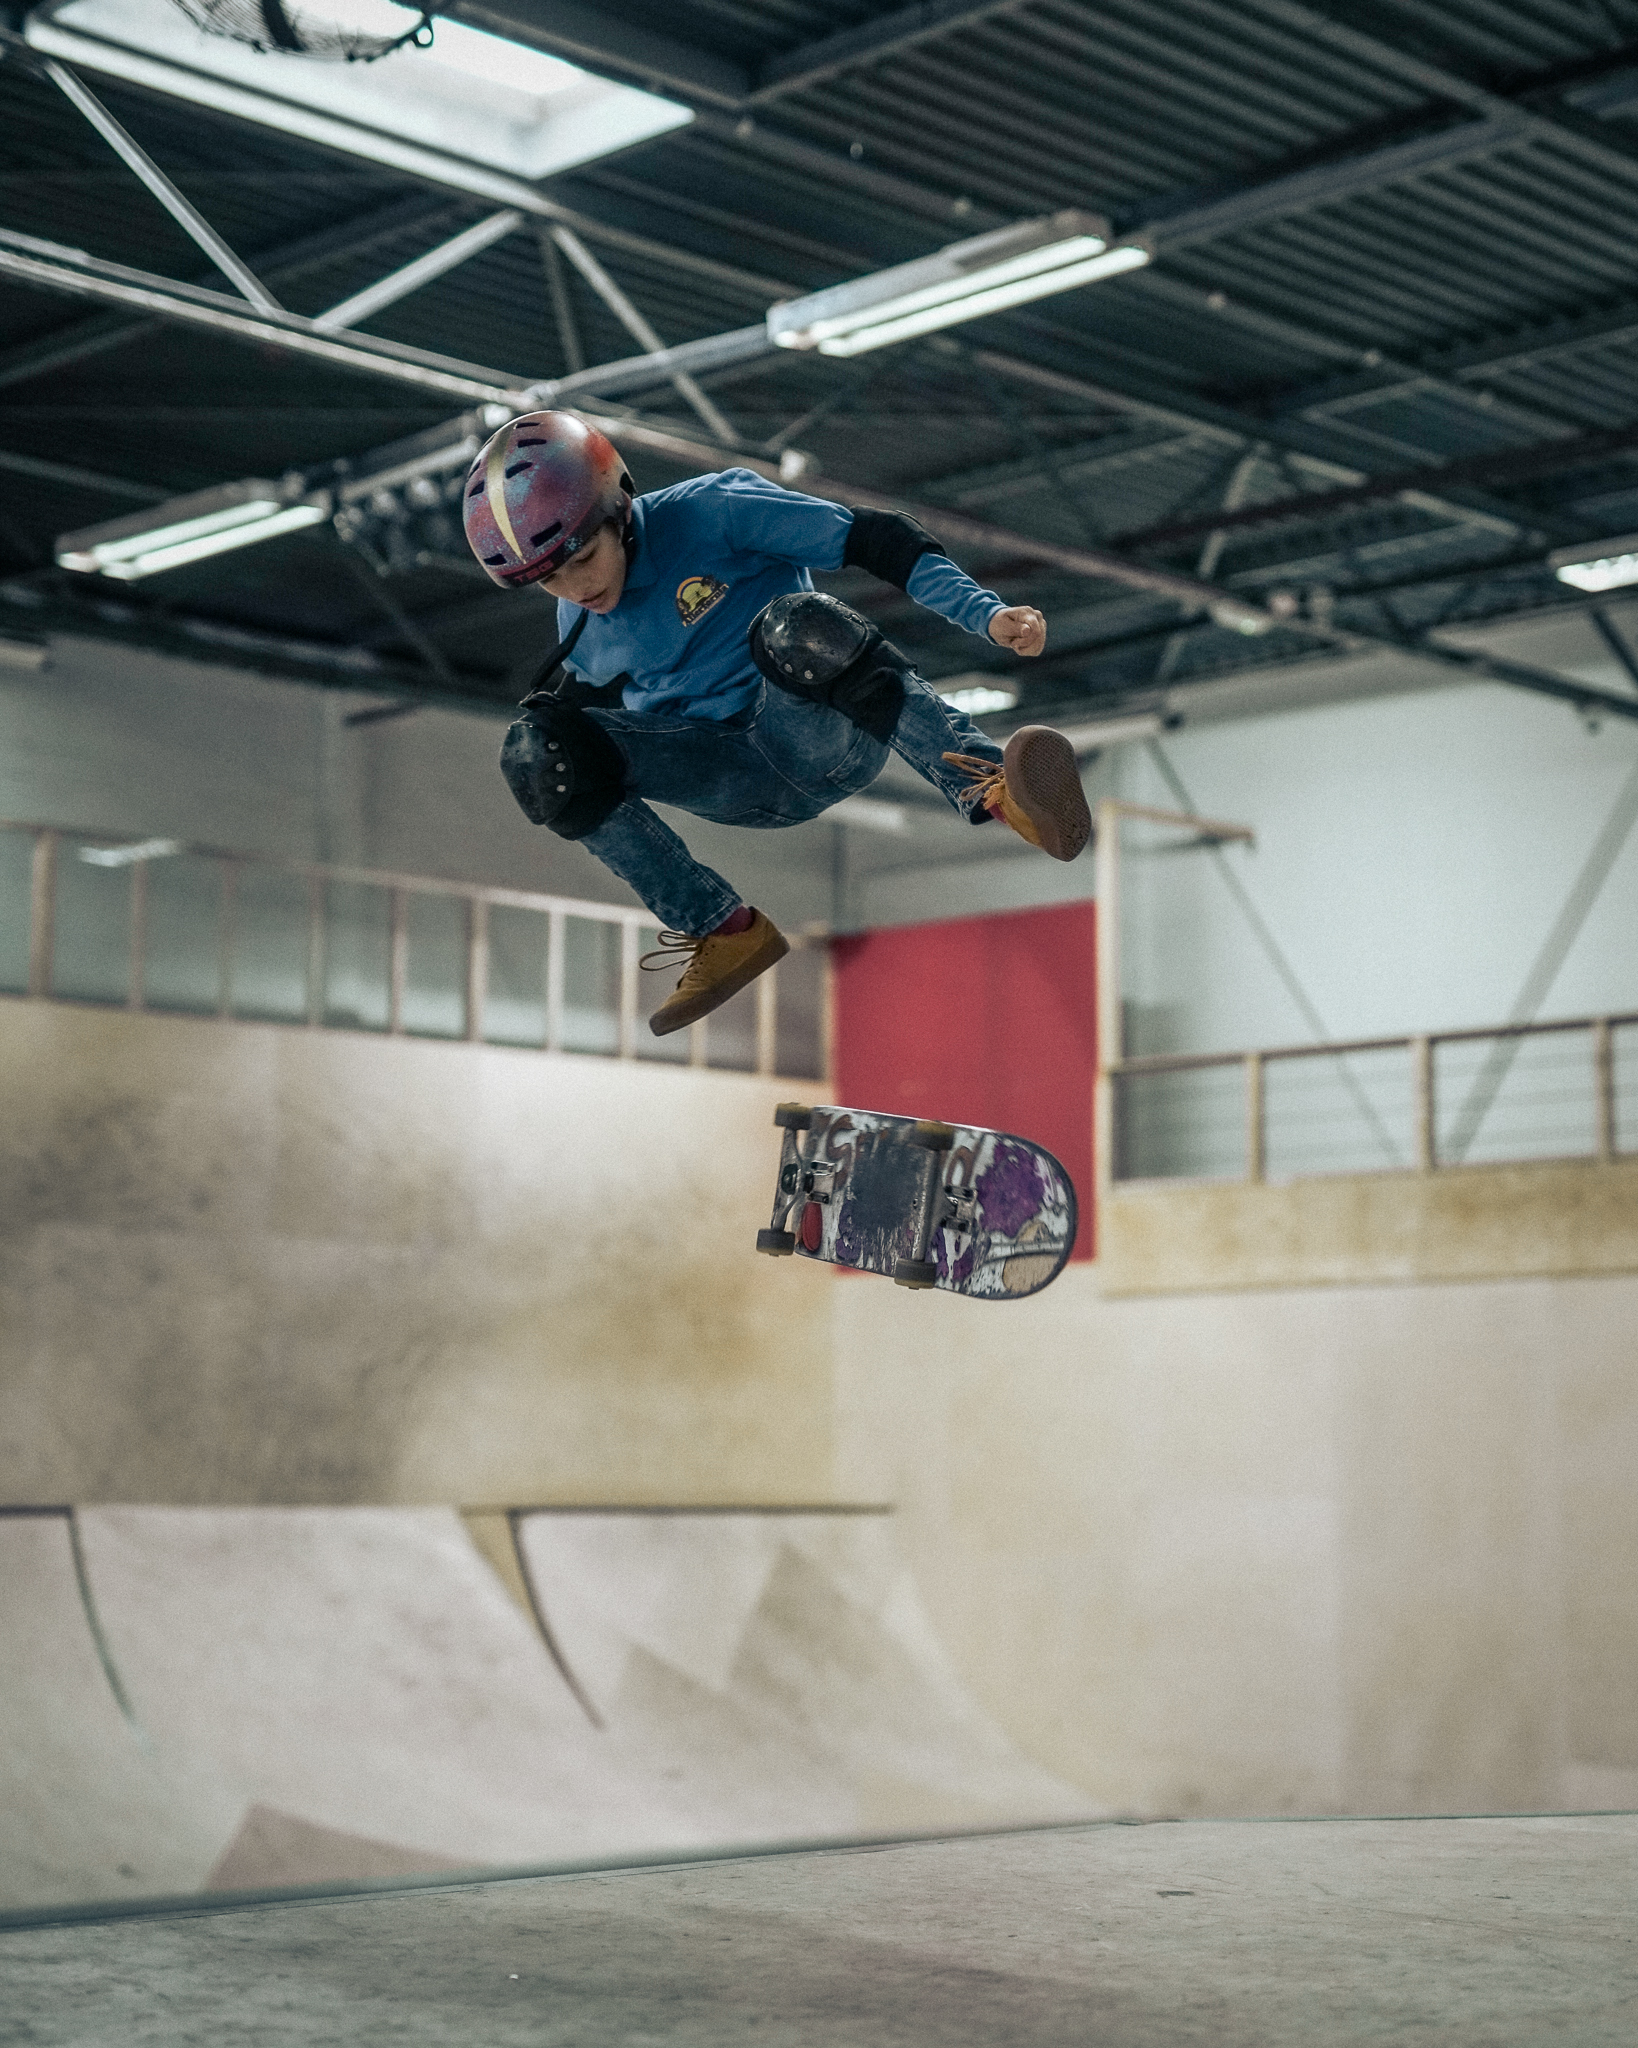 Project fearless x skate land workshop